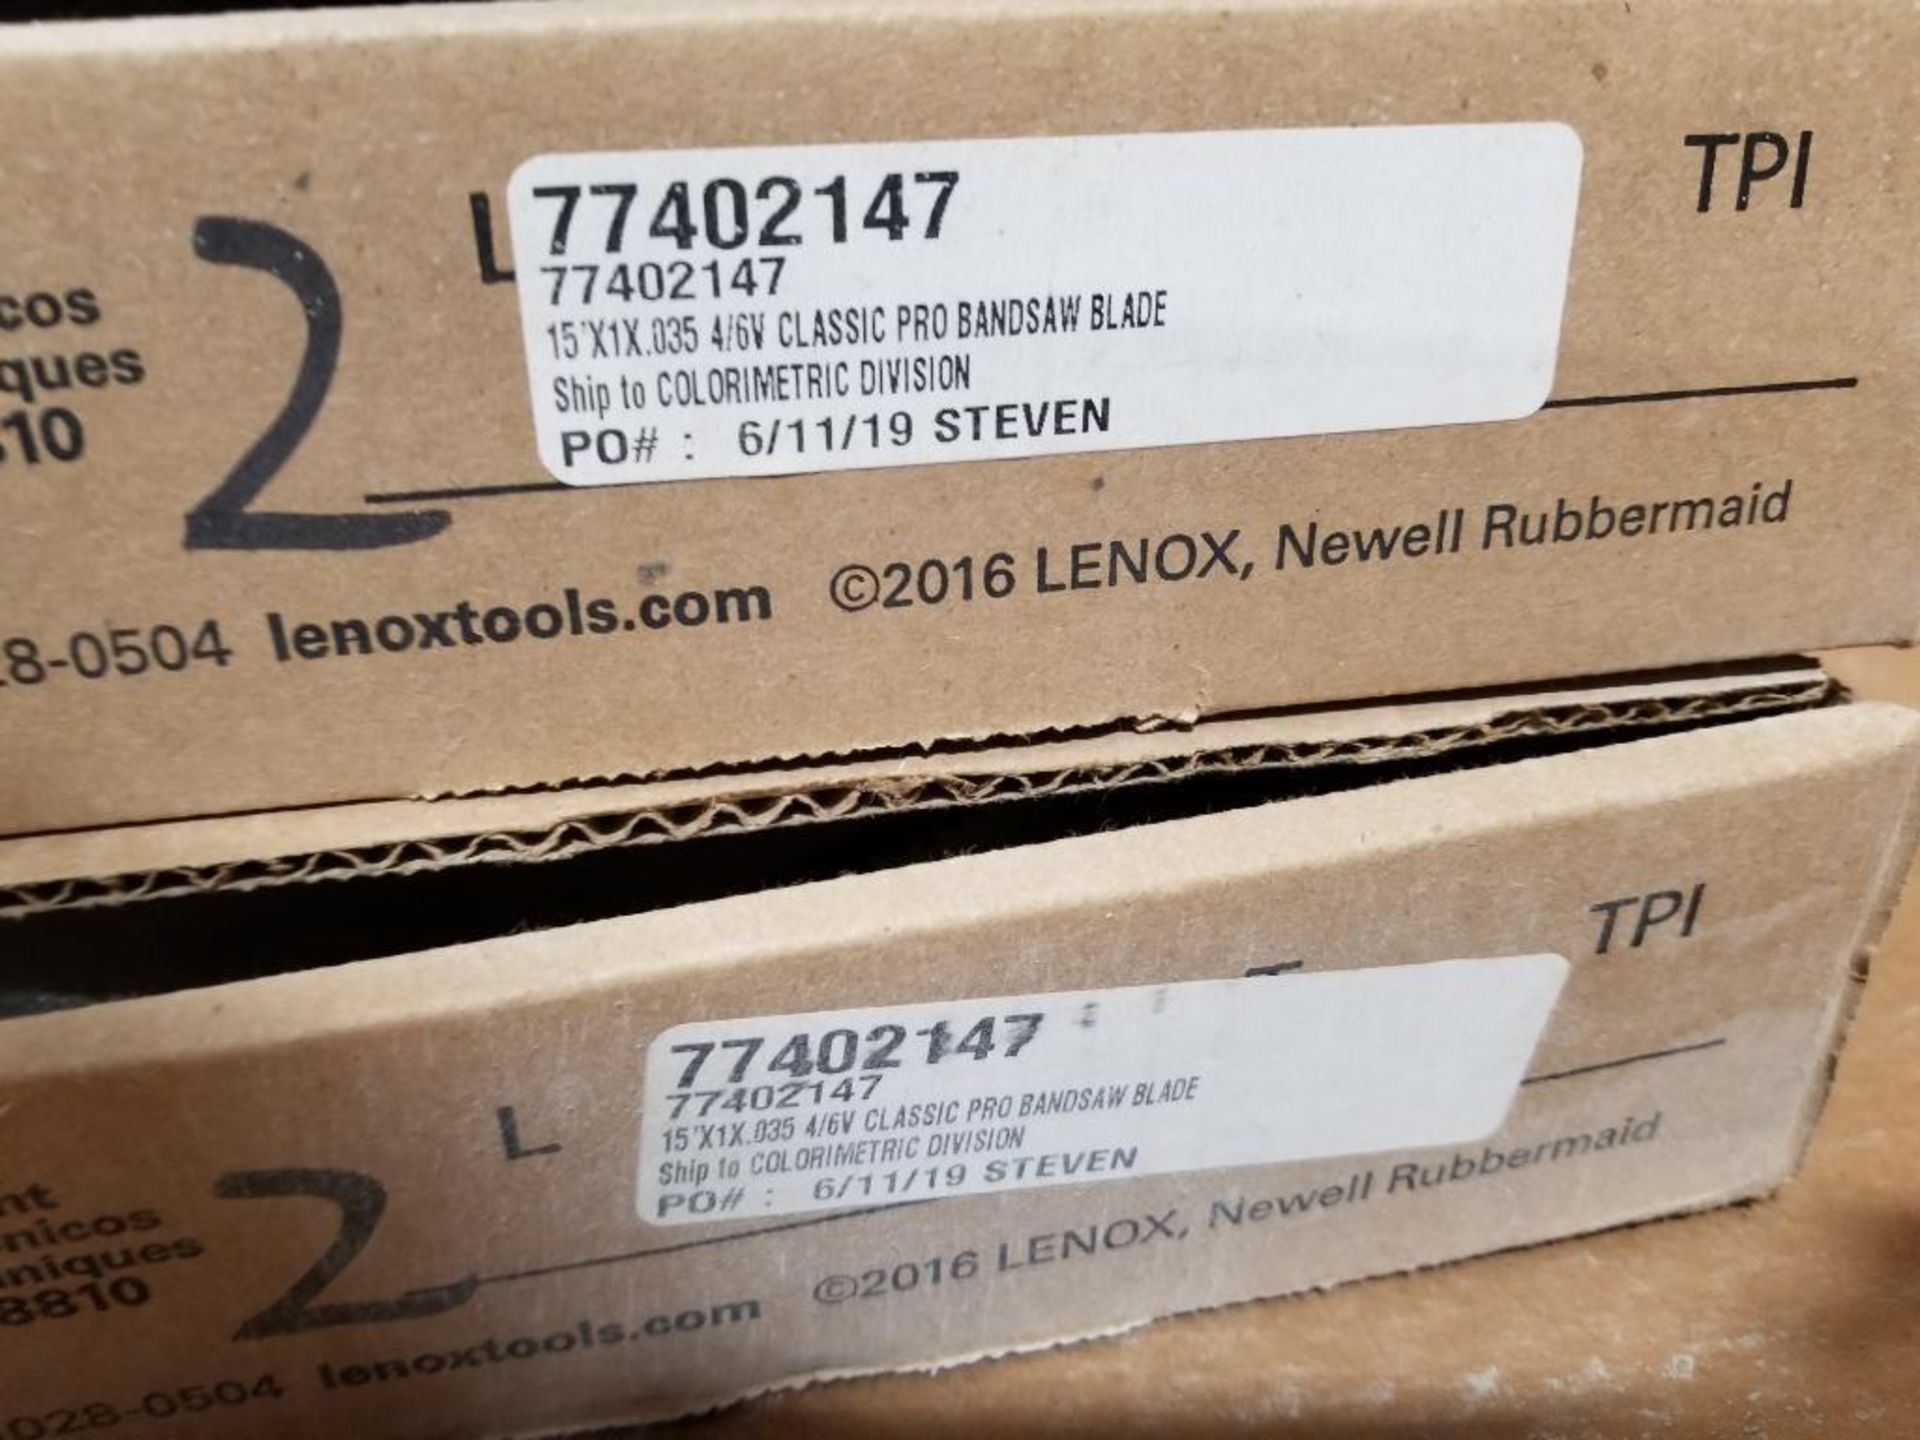 Qty 2 - Lenox band saw blades. Part number 77402147. 15ft x 1in. - Image 2 of 2